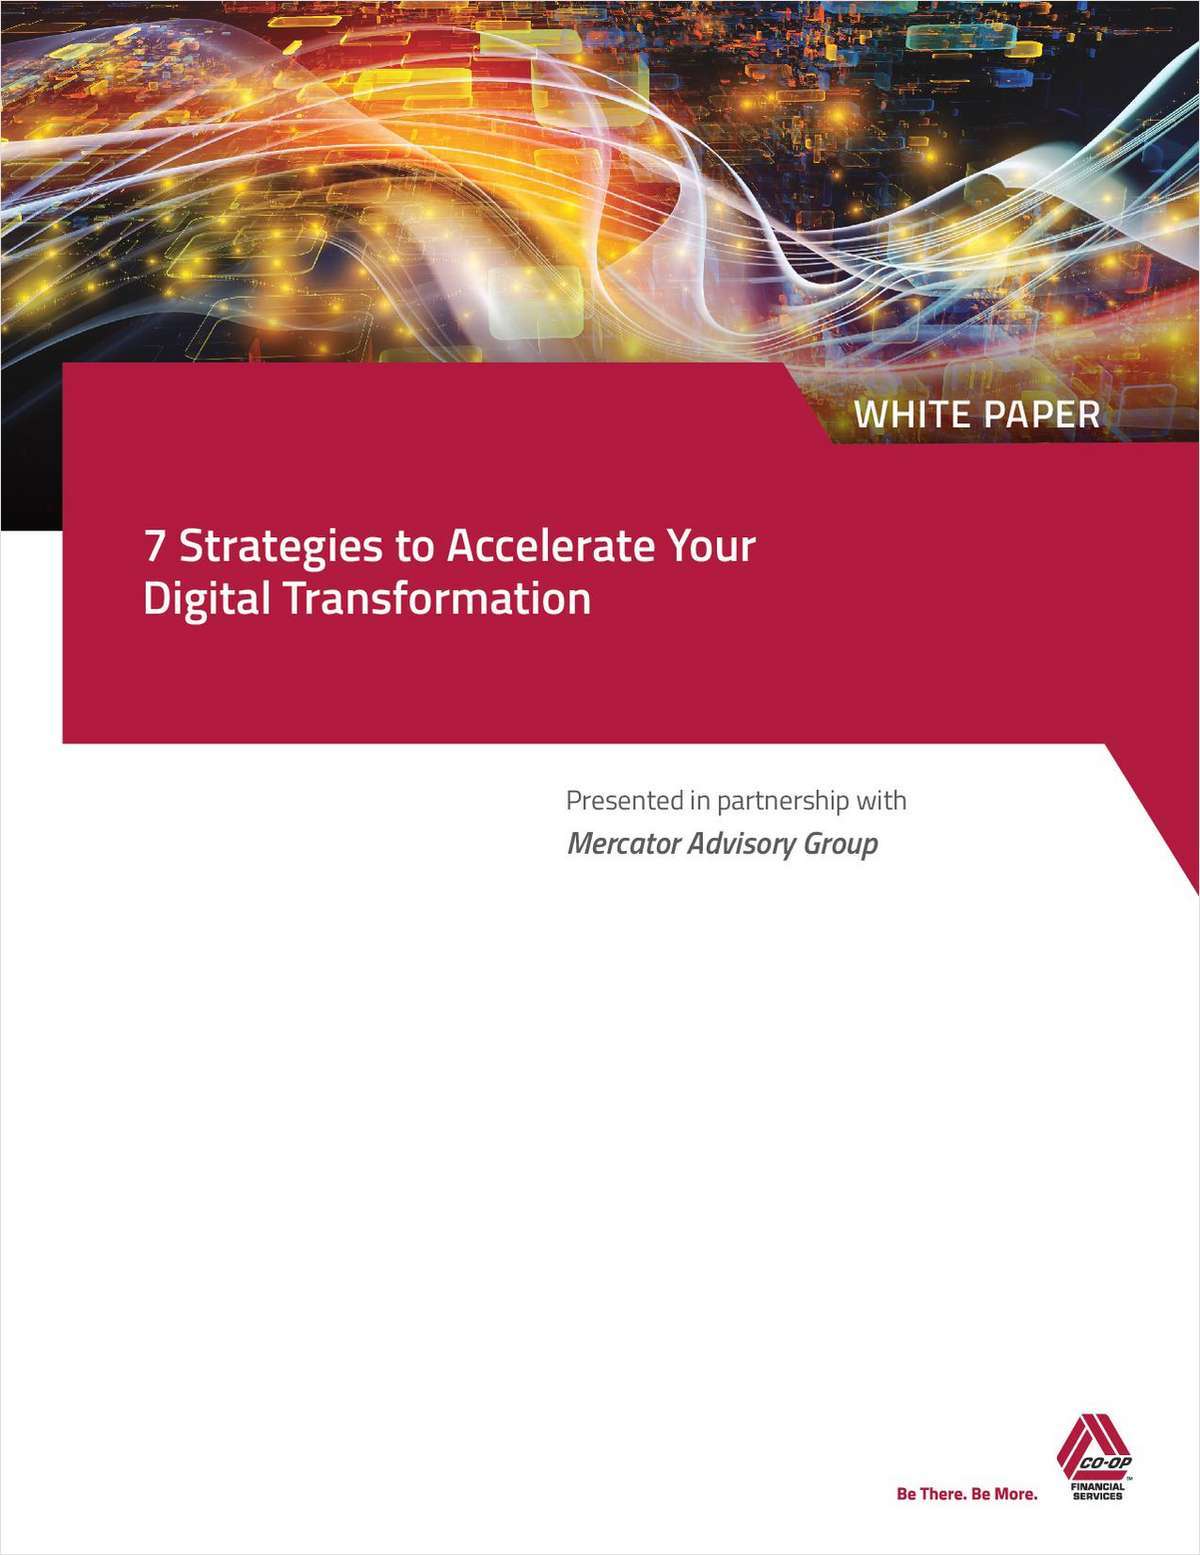 7 Strategies to Accelerate Your Digital Transformation